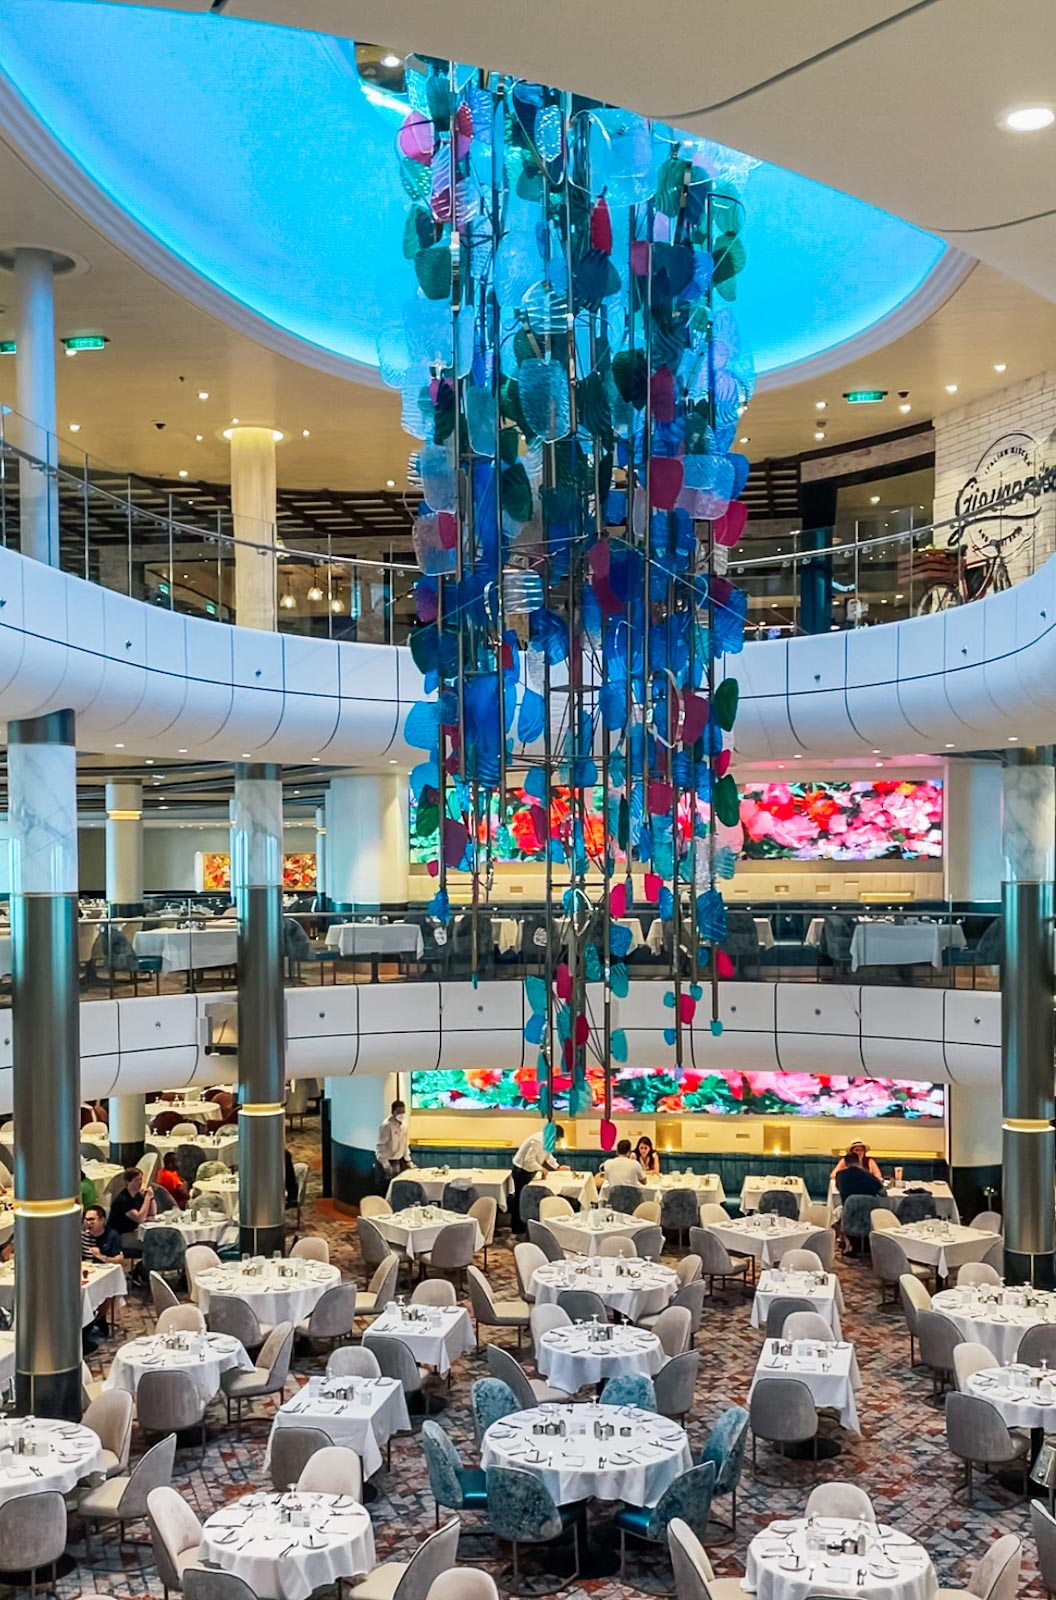 Main Dining Room On Odyssey of the Seas